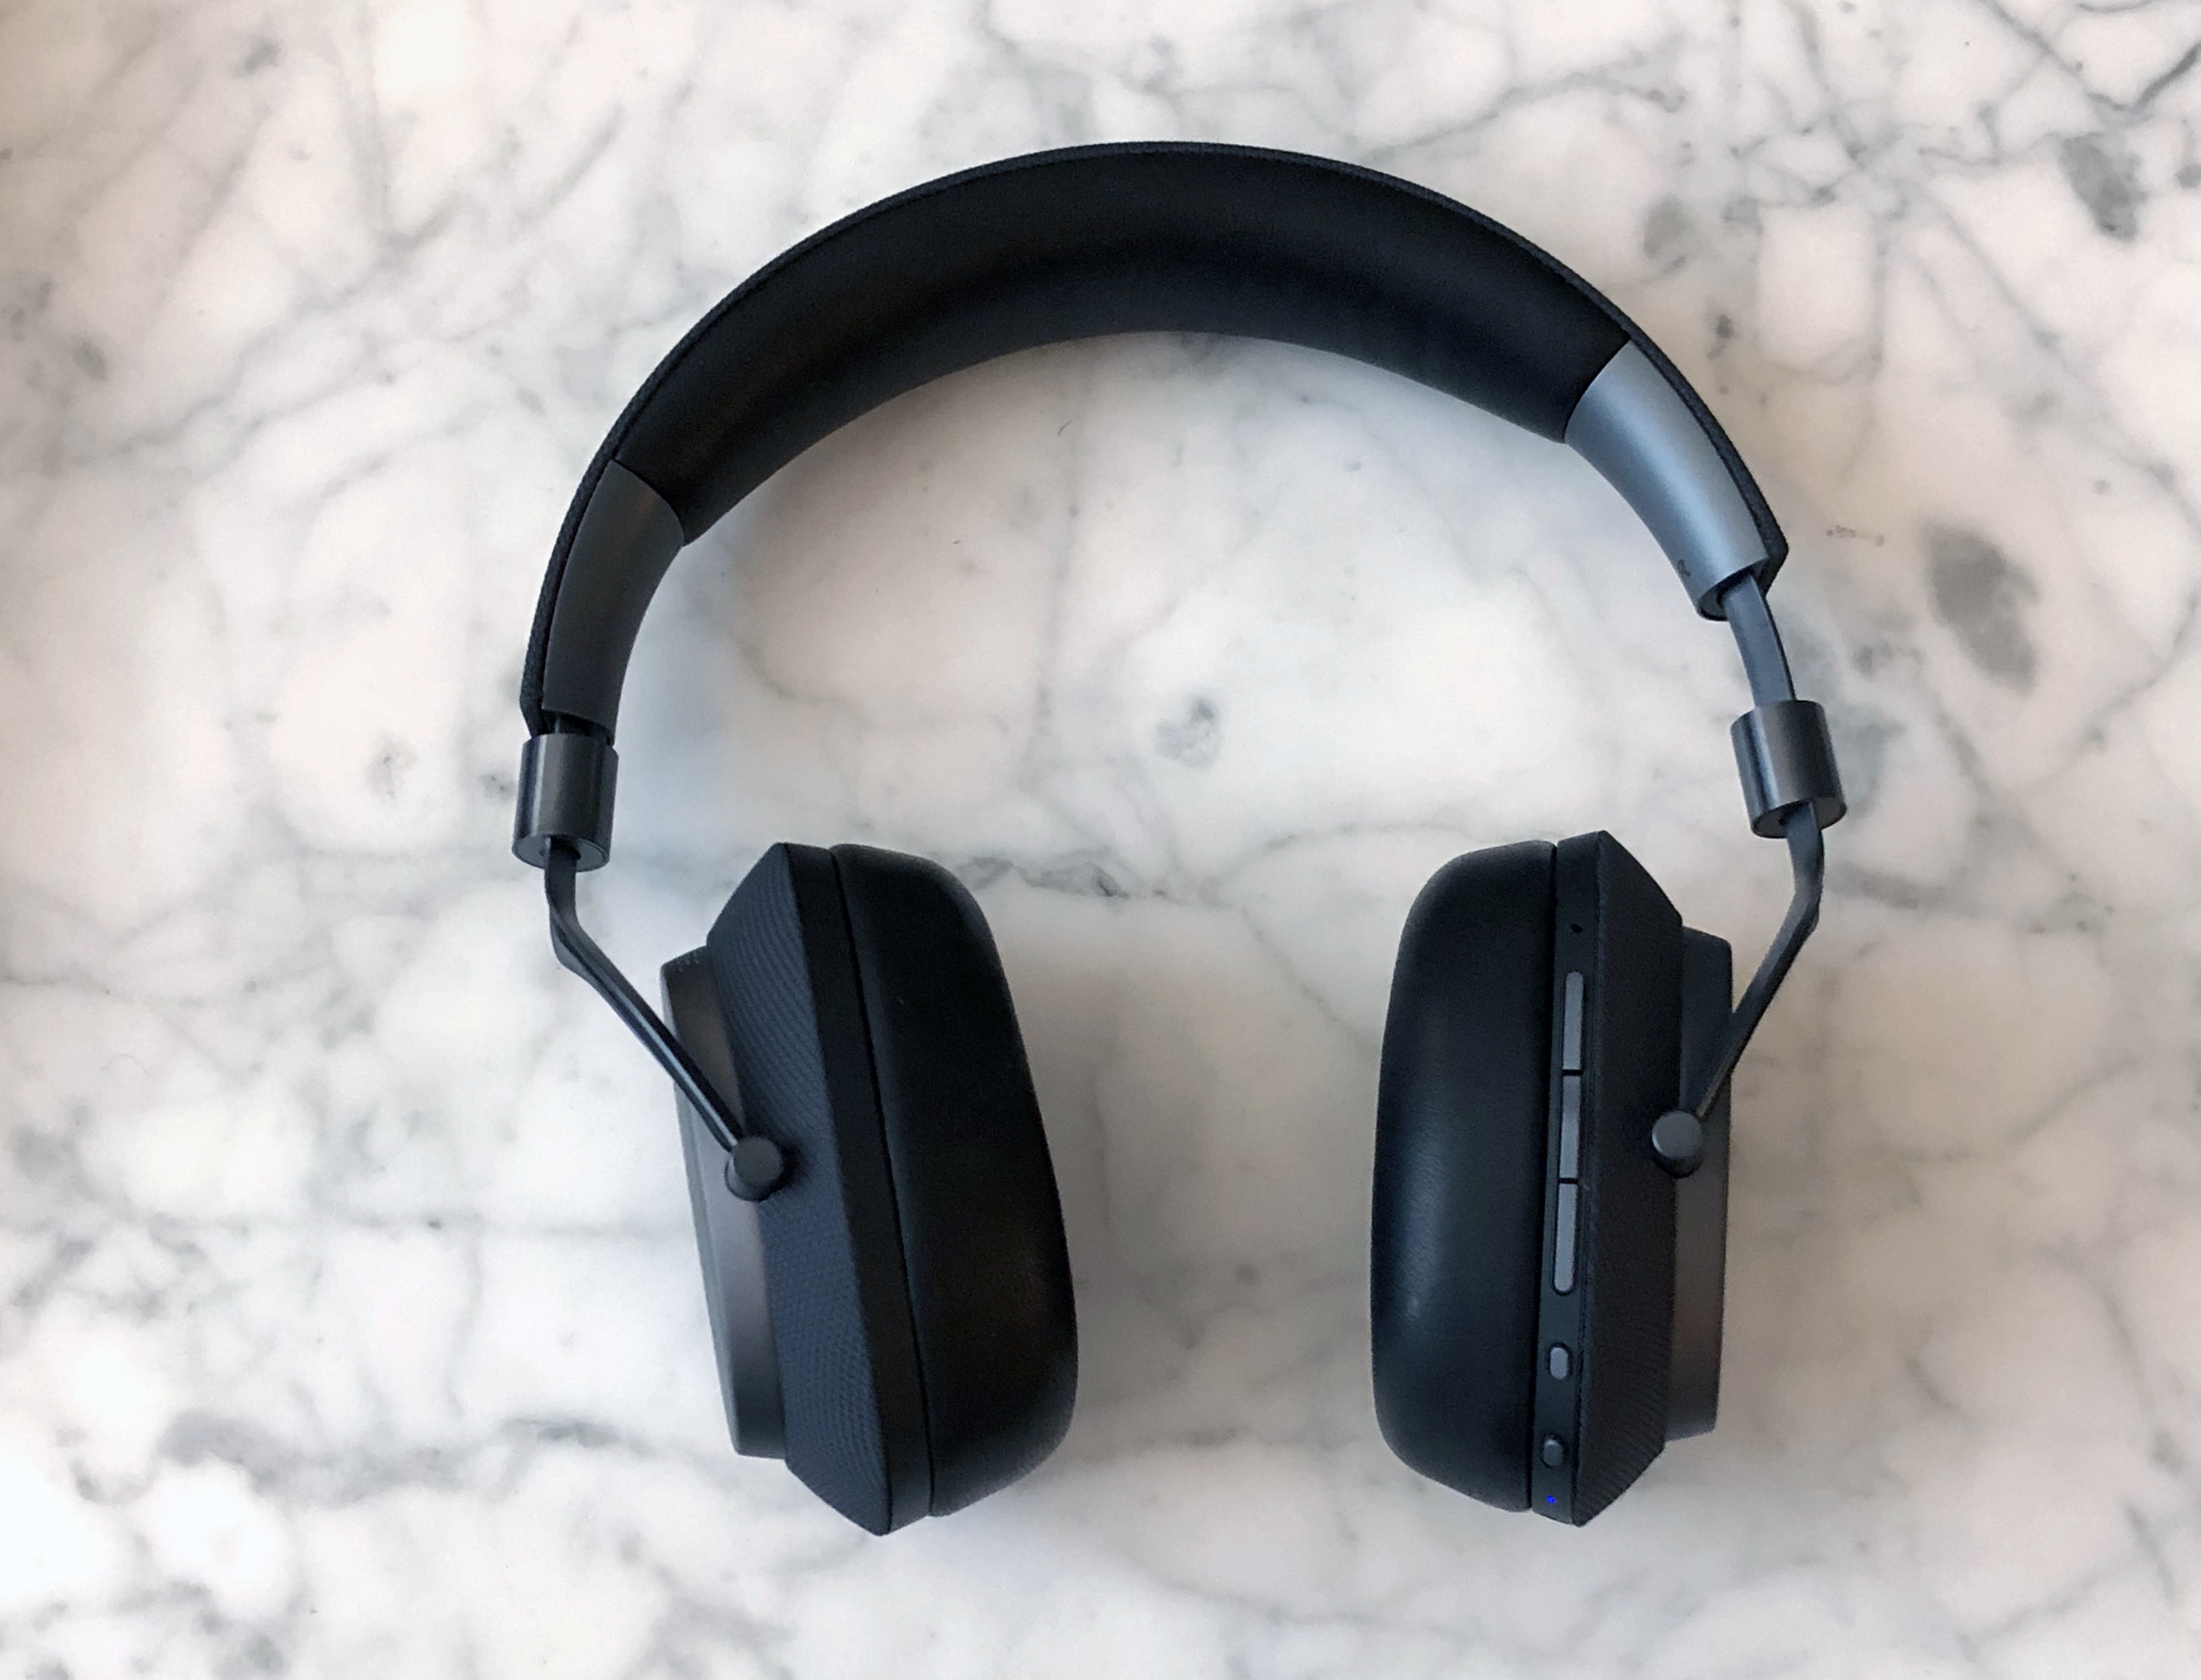 The Bowers & Wilkins PX headphones offer big sound at a high price